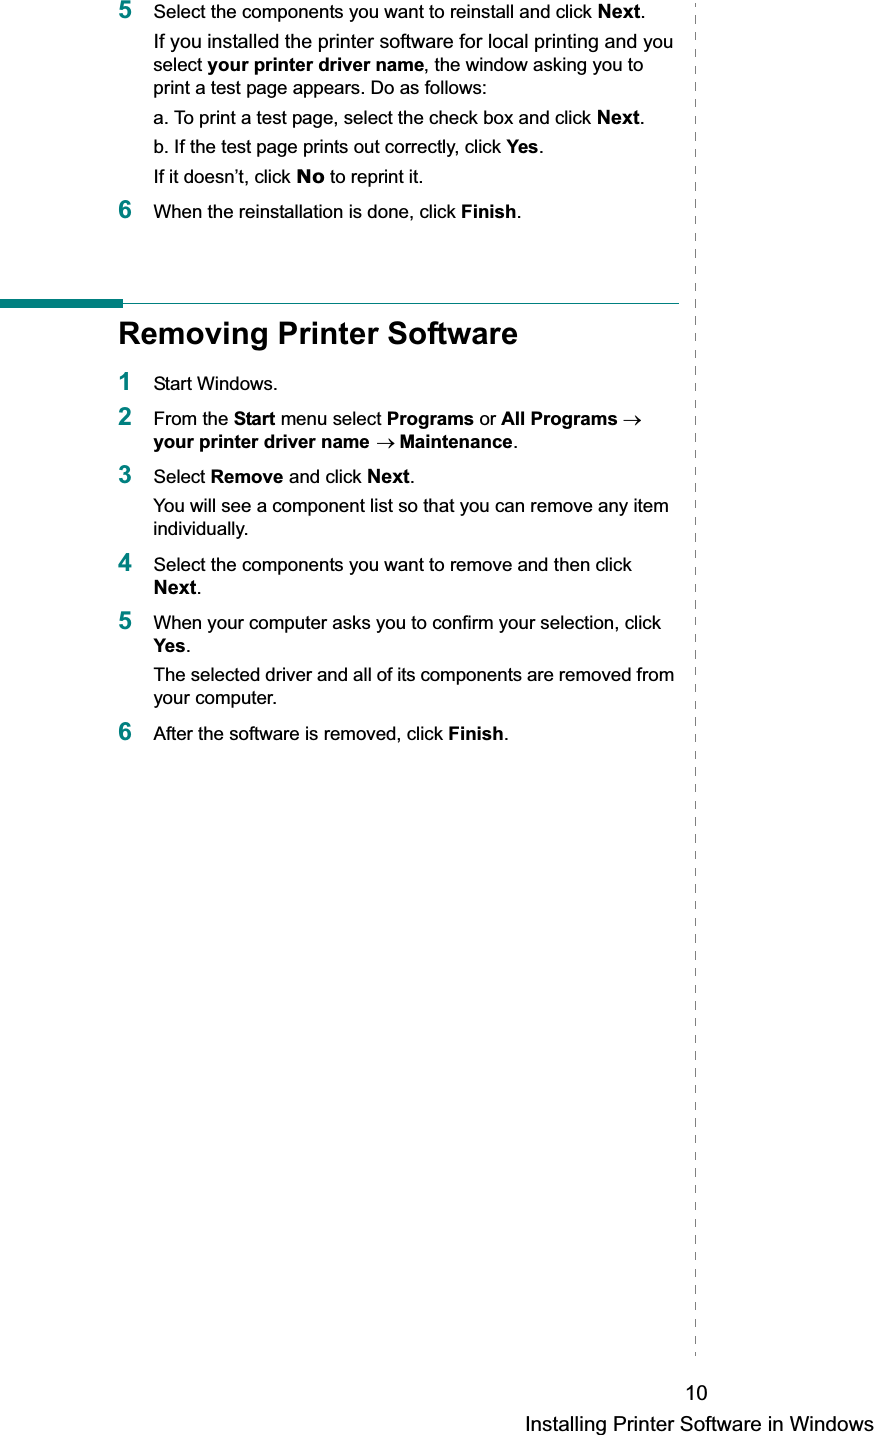 Installing Printer Software in Windows105Select the components you want to reinstall and click Next.If you installed the printer software for local printing and you select your printer driver name, the window asking you to print a test page appears. Do as follows:a. To print a test page, select the check box and click Next.b. If the test page prints out correctly, click Yes.If it doesn’t, click No to reprint it.6When the reinstallation is done, click Finish.Removing Printer Software1Start Windows.2From the Start menu select Programs or All Programs oyour printer driver name oMaintenance.3Select Remove and click Next.You will see a component list so that you can remove any item individually.4Select the components you want to remove and then click Next.5When your computer asks you to confirm your selection, click Yes.The selected driver and all of its components are removed from your computer.6After the software is removed, click Finish.